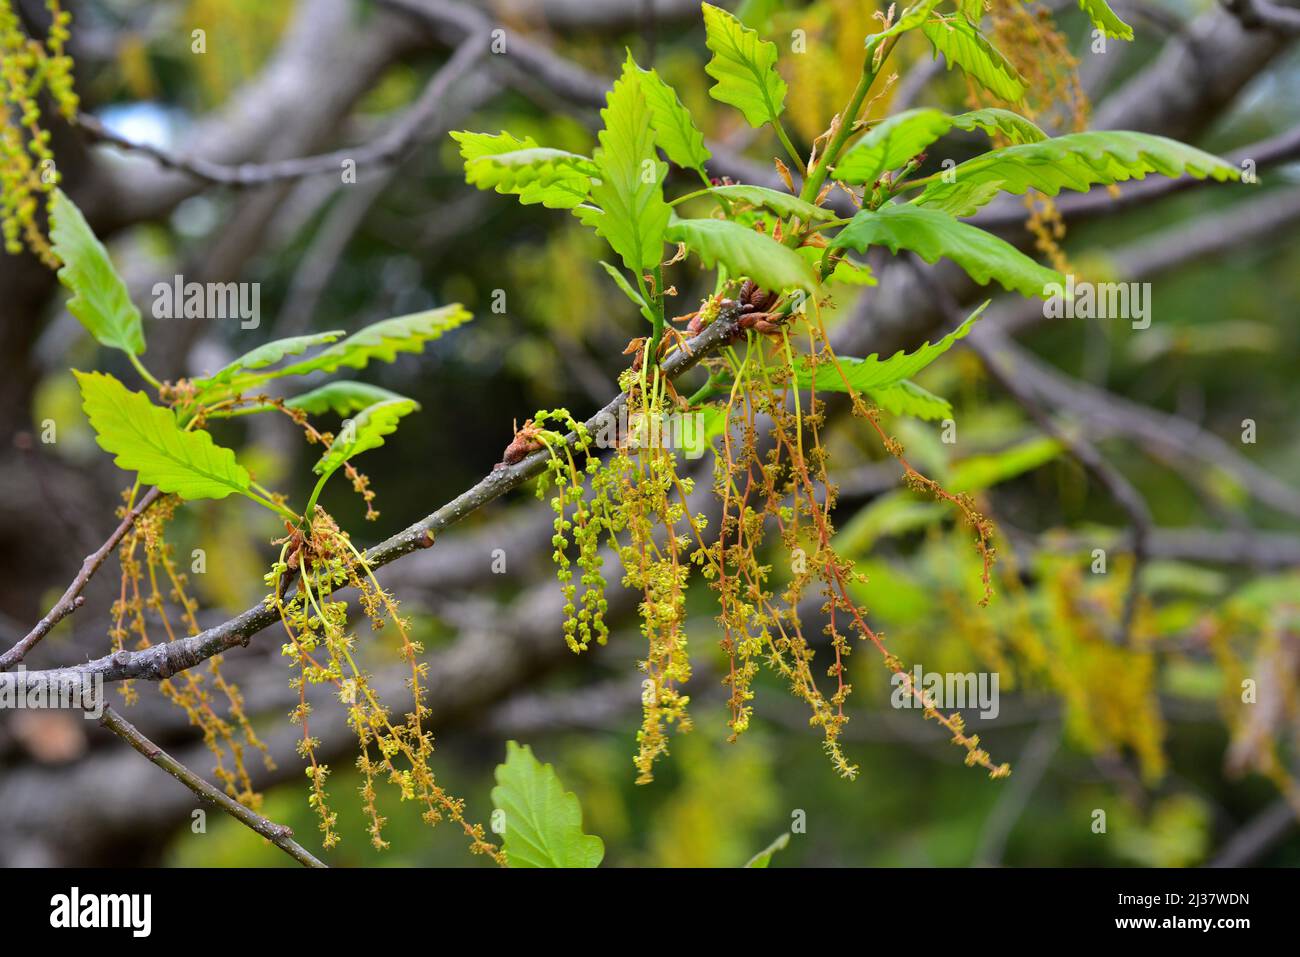 Sessile oak (Quercus petraea) is a deciduous tree native to central Europe, mountains of southern Europe and Asia Minor. This photo was taken in Stock Photo